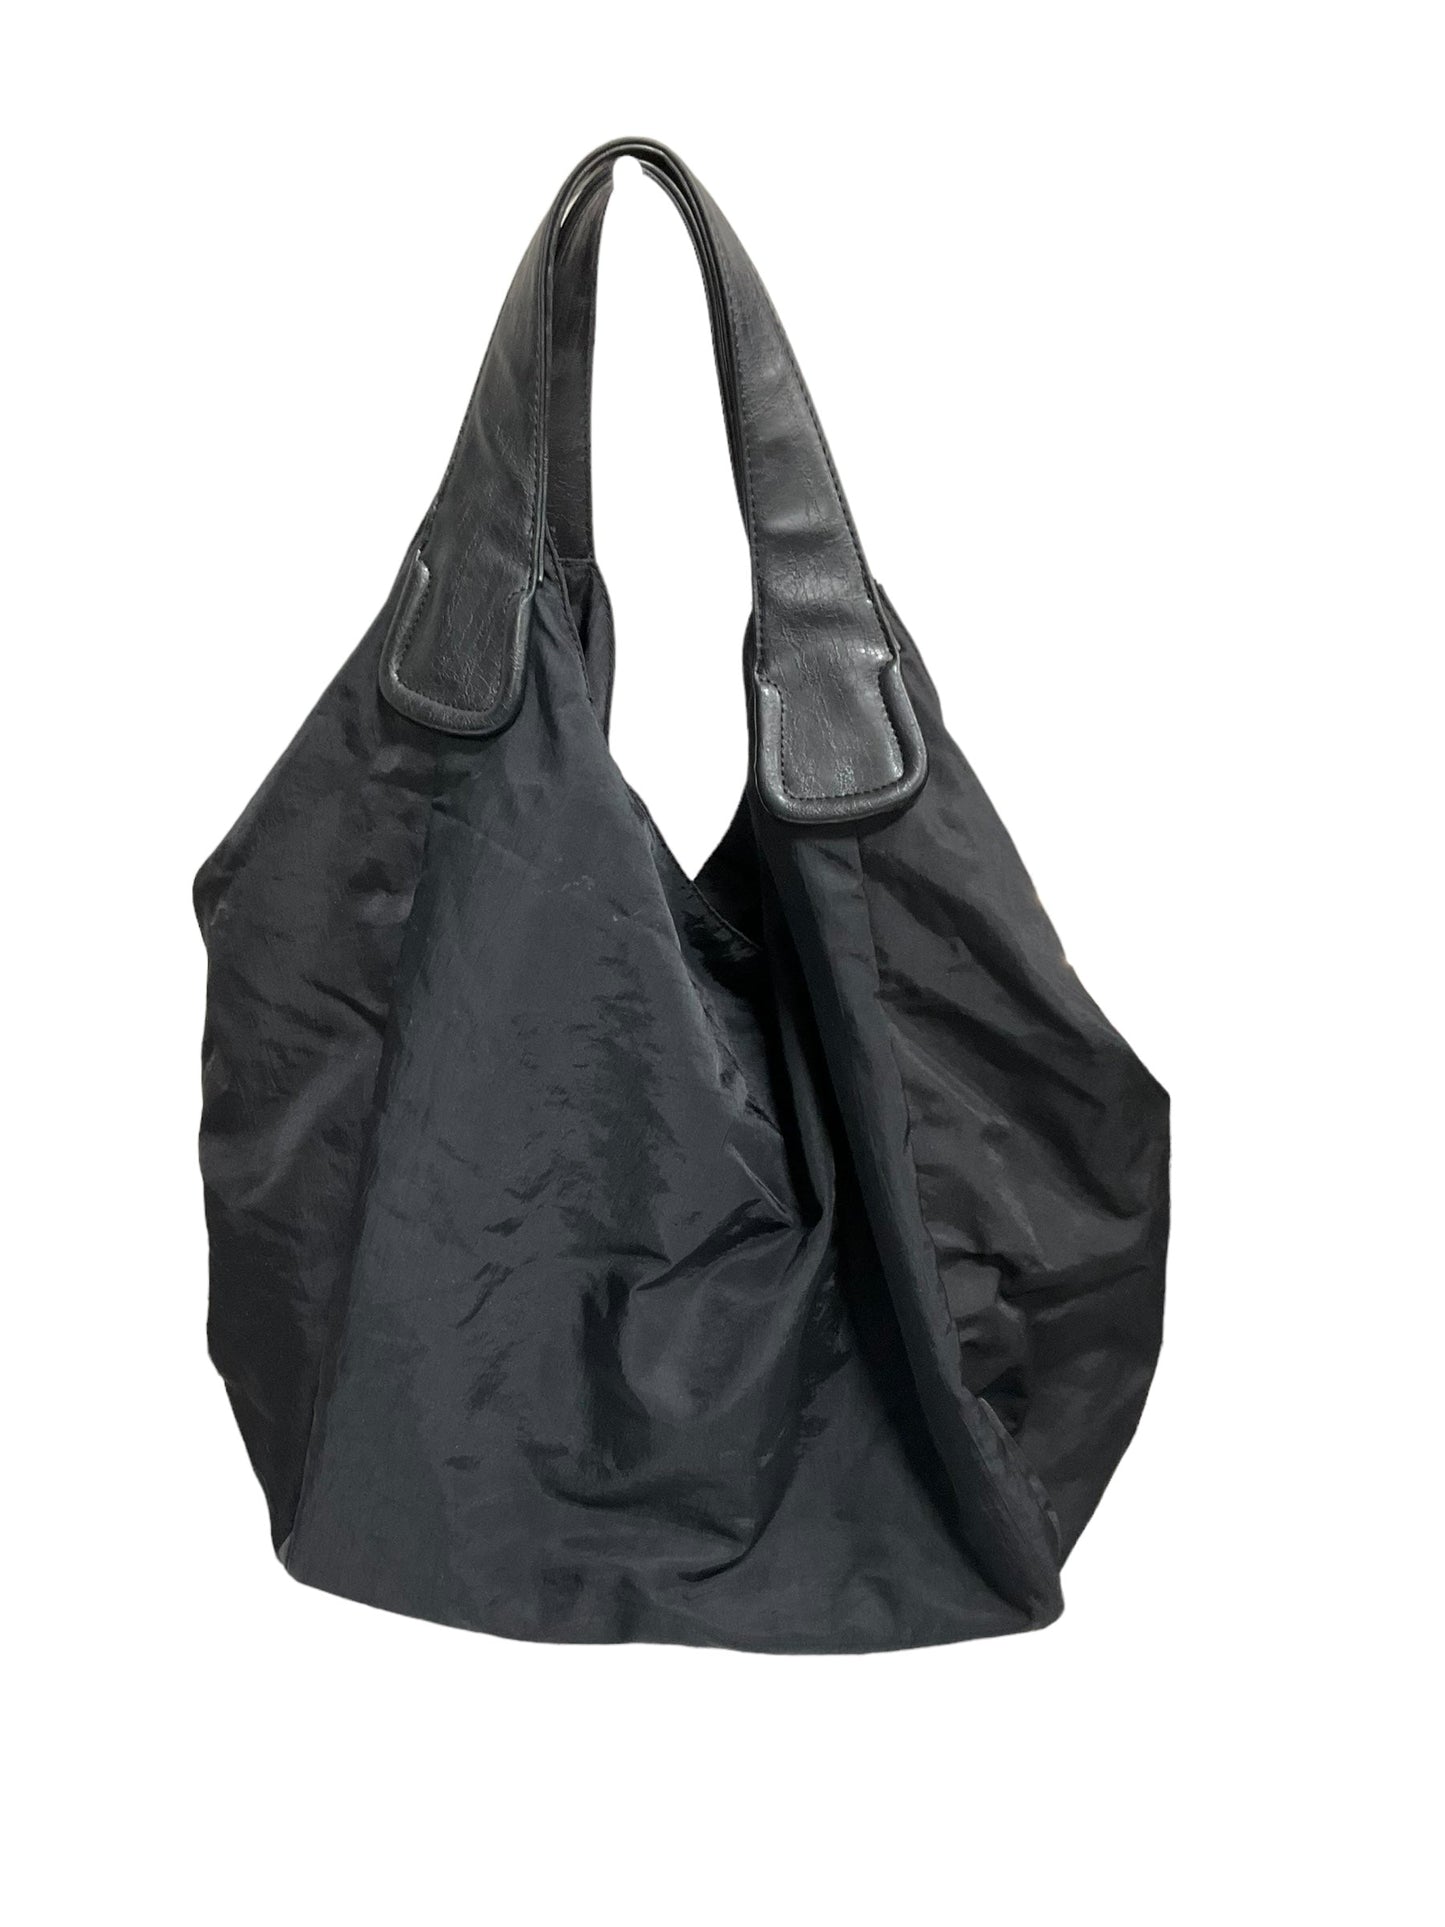 Duffle And Weekender Designer By Hobo Intl  Size: Large